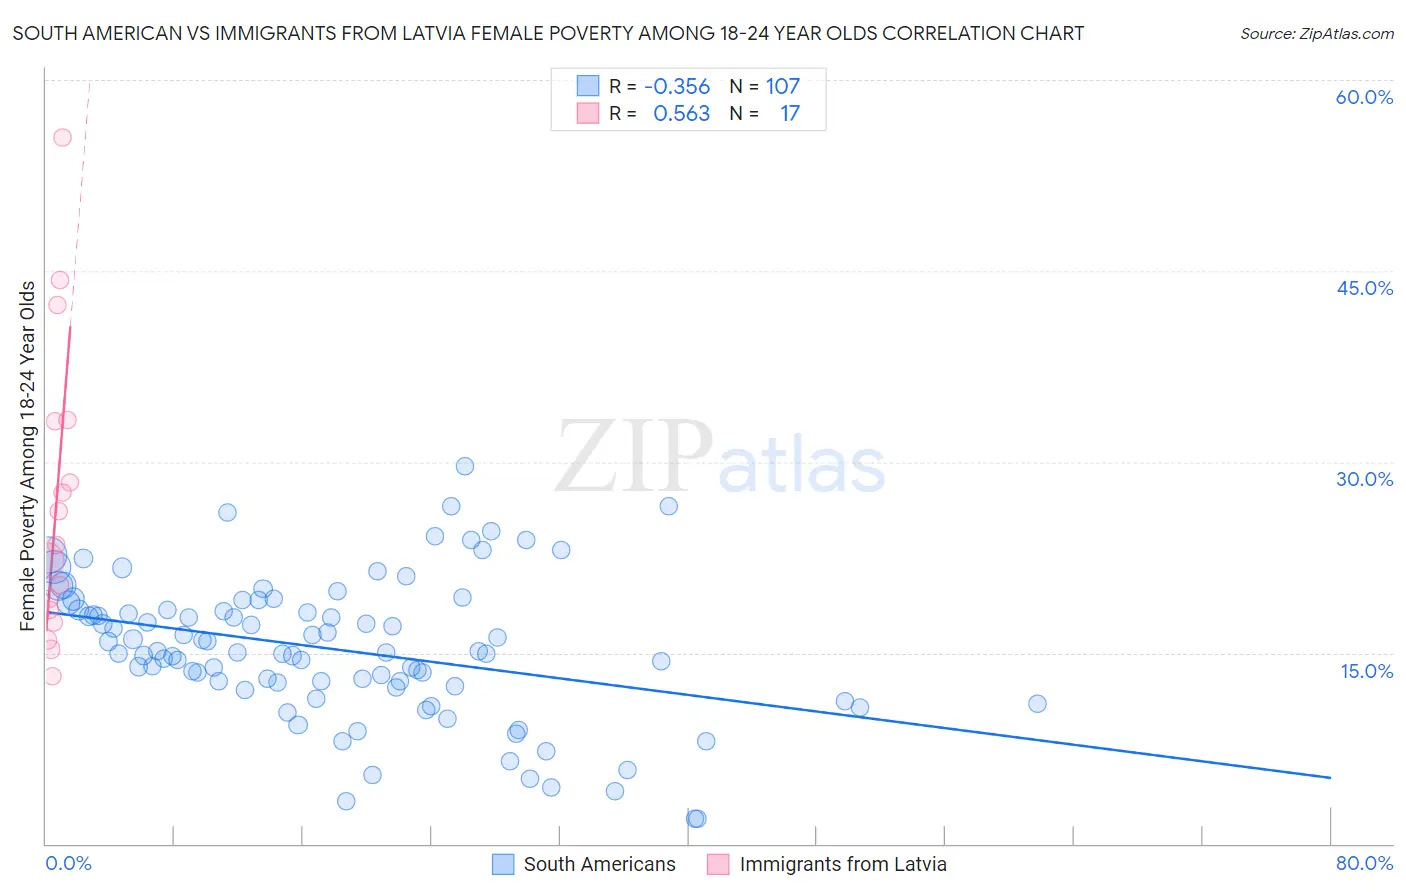 South American vs Immigrants from Latvia Female Poverty Among 18-24 Year Olds